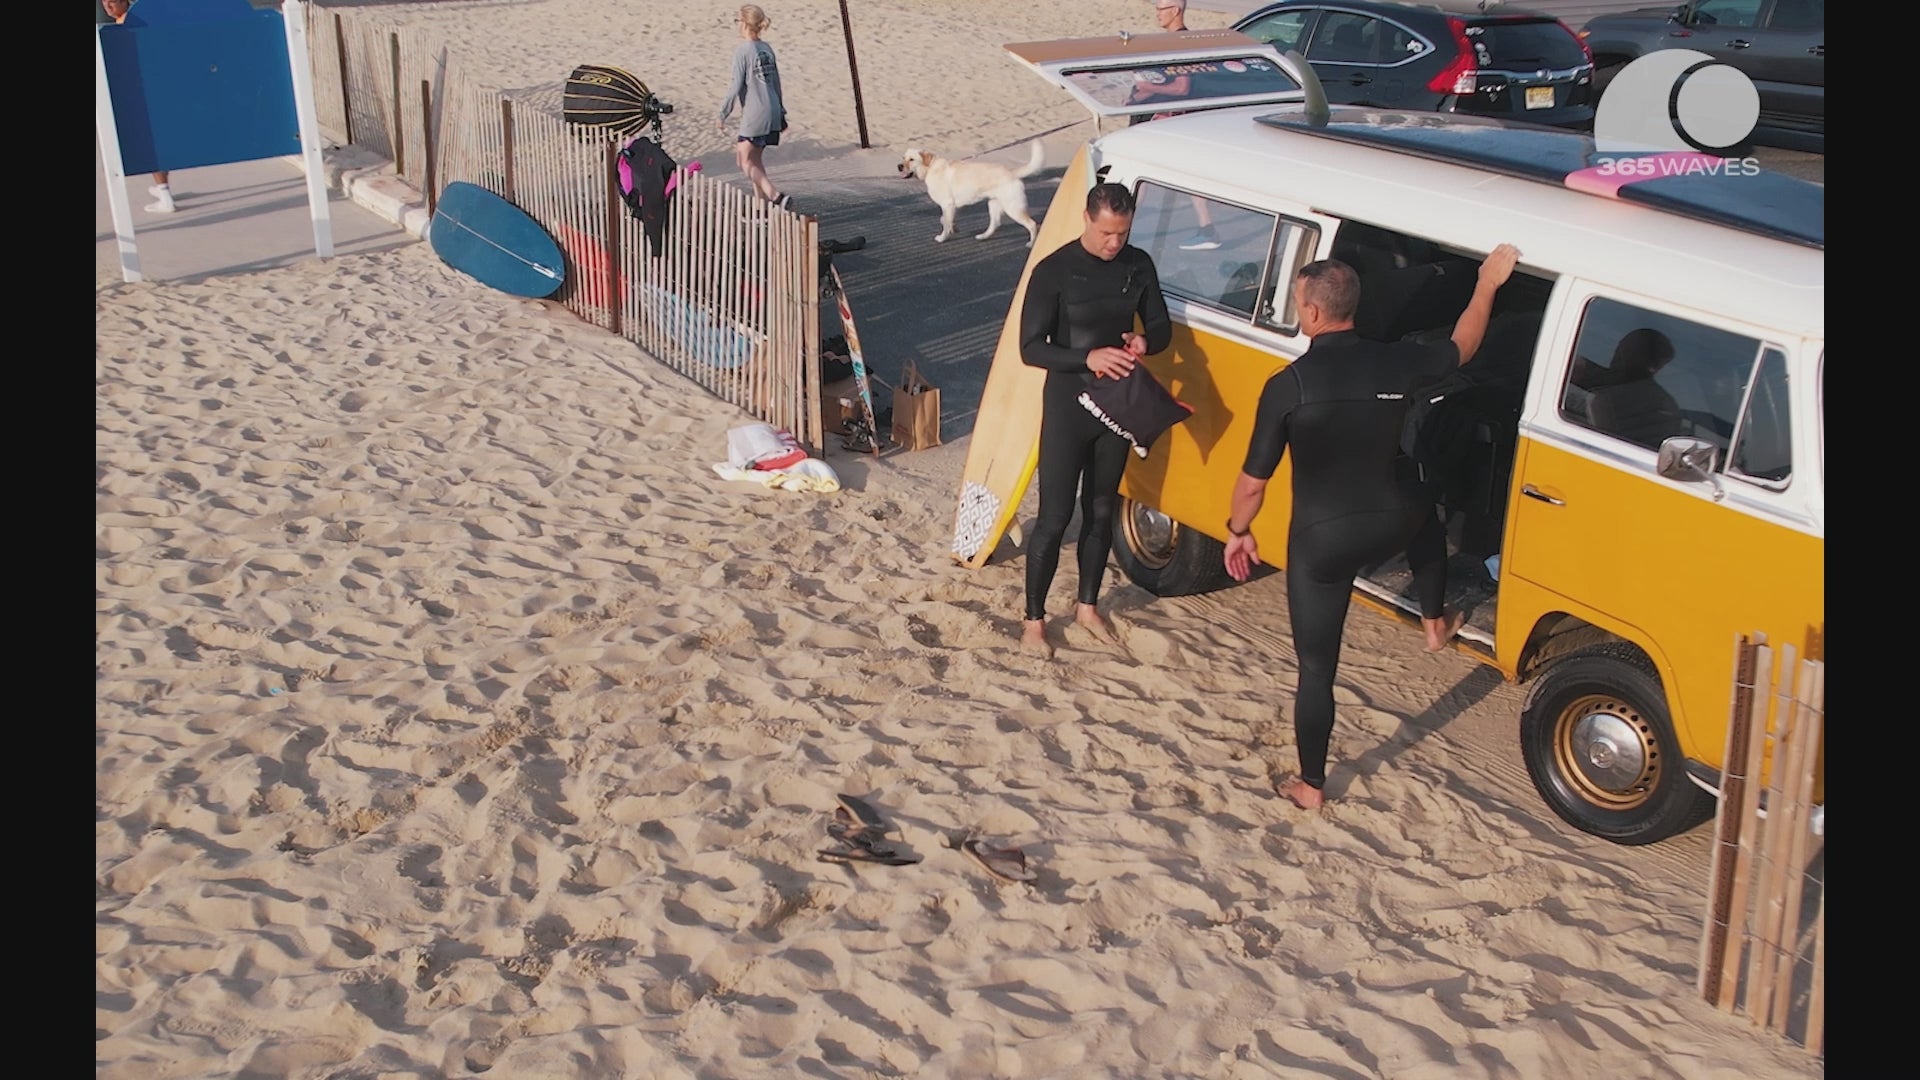 A video of two men using the Changing Mat/Dry Bag on a sandy beach to keep a yellow VW van dry from their wetsuits